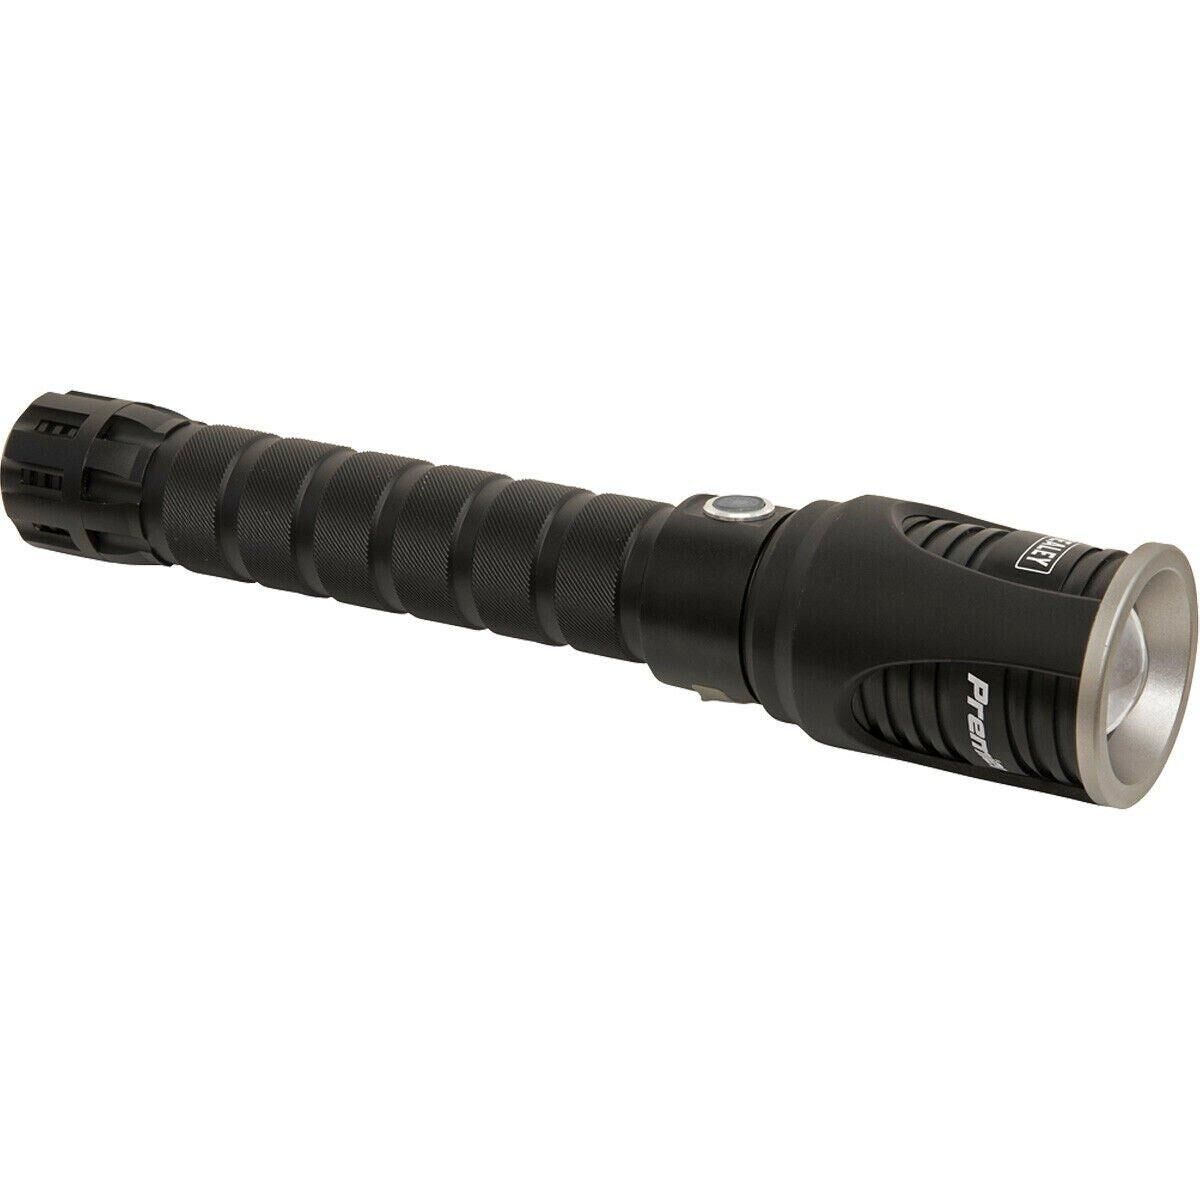 Loops Aluminium Torch - 20W CREE XHP50 LED - Adjustable Focus - Rechargeable Battery